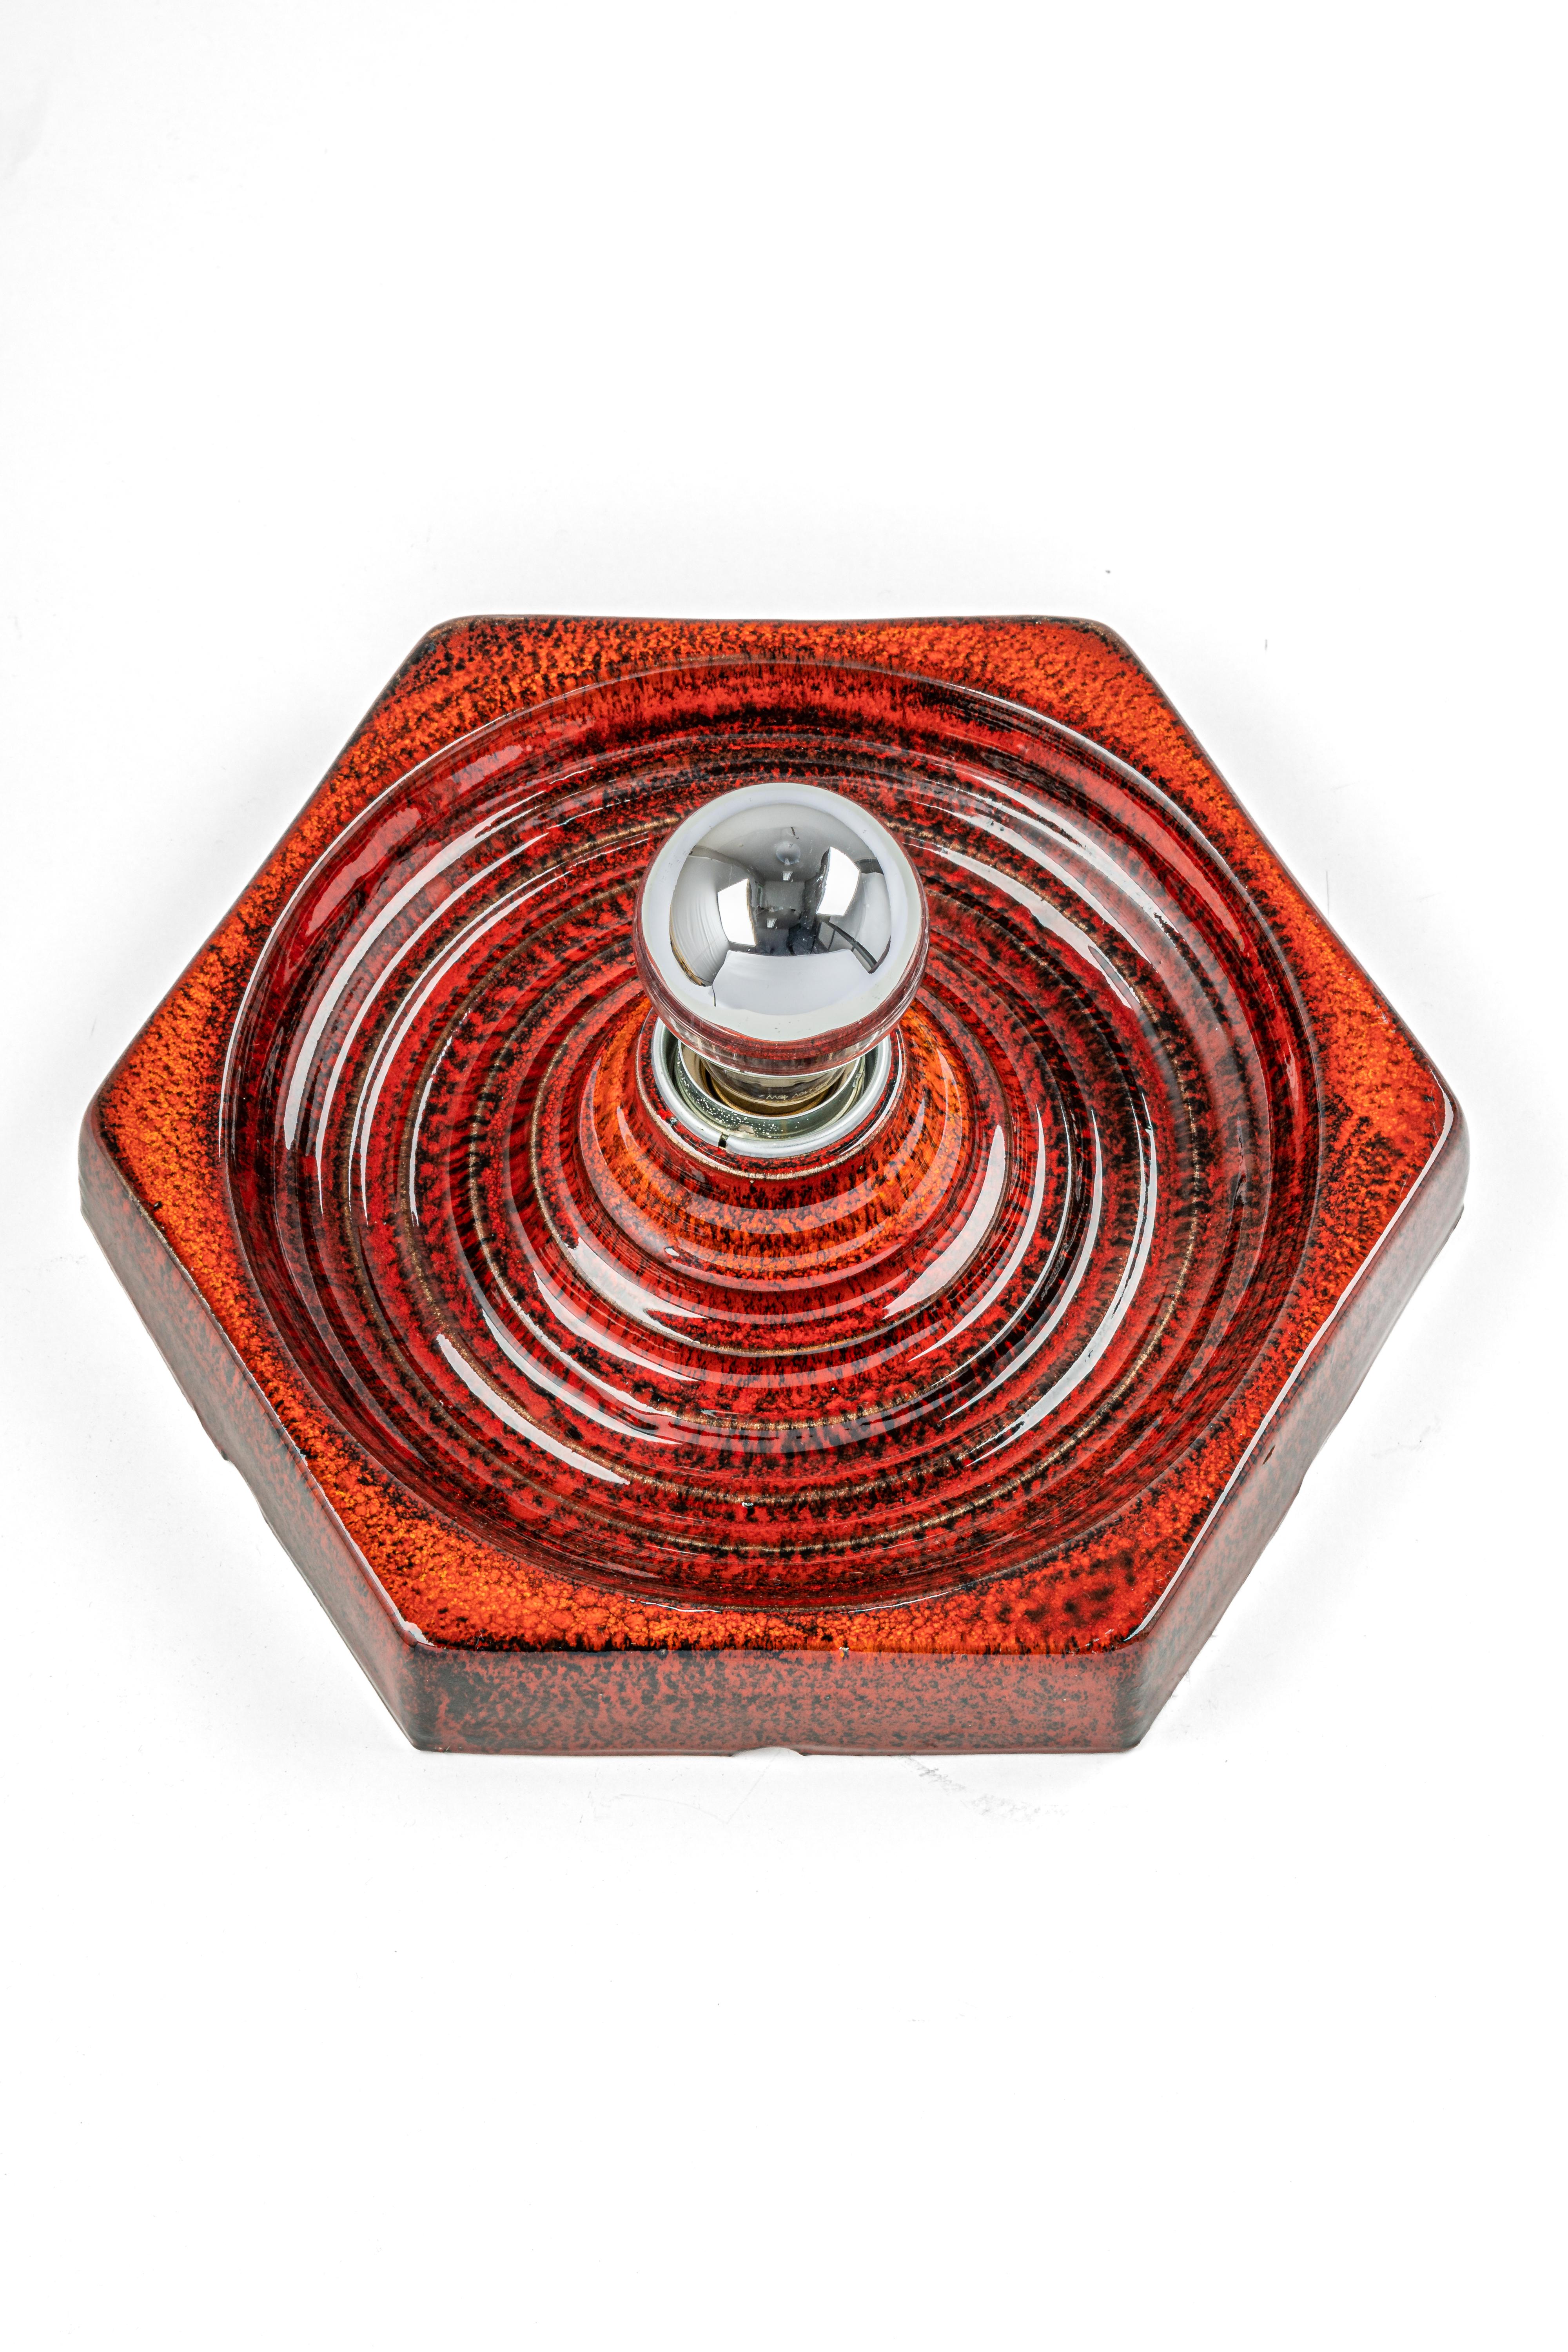 Mid-Century Modern 1 of 8 Ceramic Red and Orange Wall Lights, Germany, 1970s For Sale